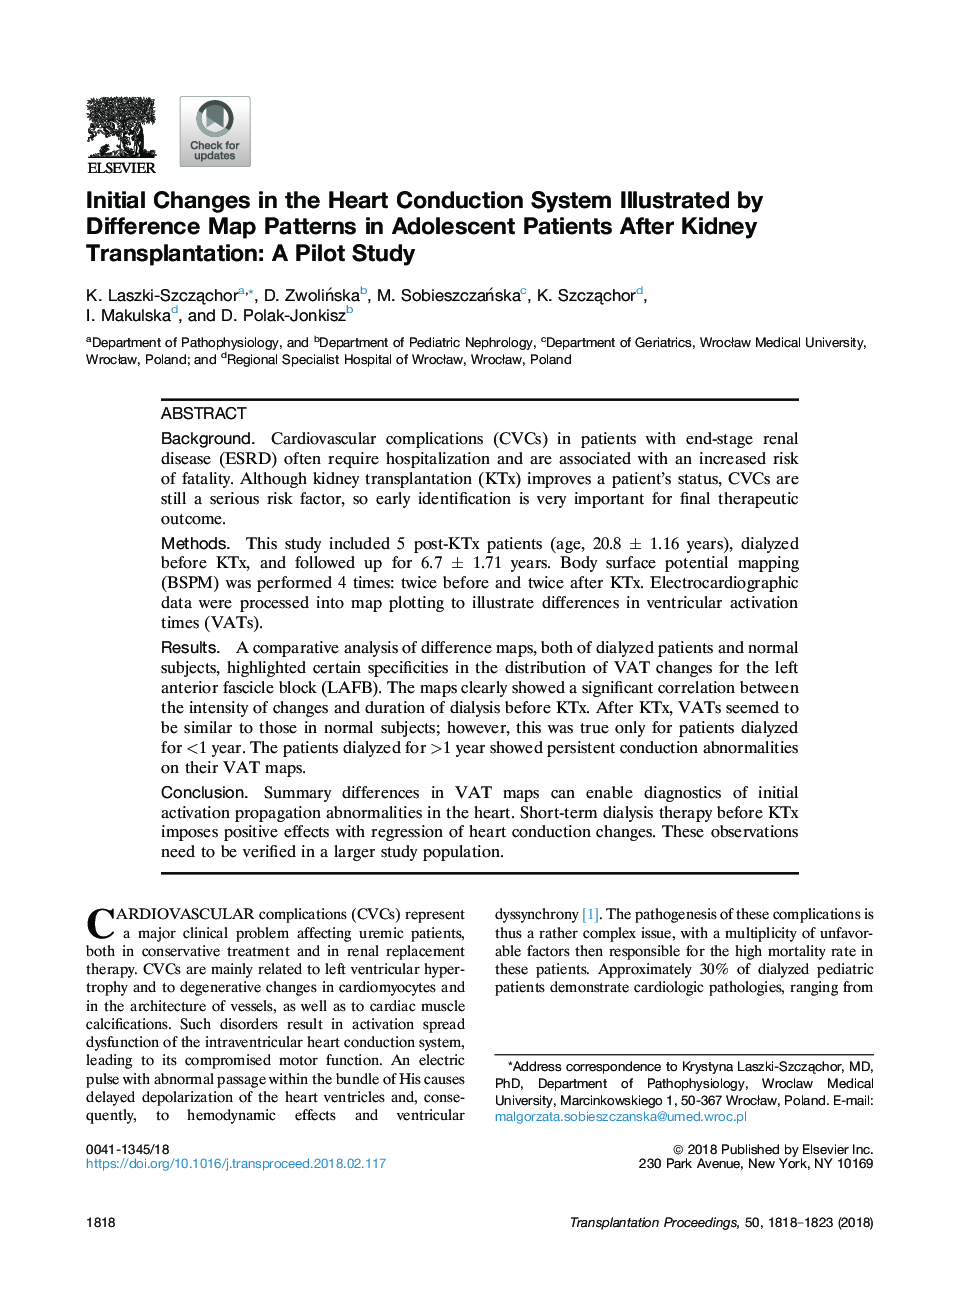 Initial Changes in the Heart Conduction System Illustrated by Difference Map Patterns in Adolescent Patients After Kidney Transplantation: A Pilot Study